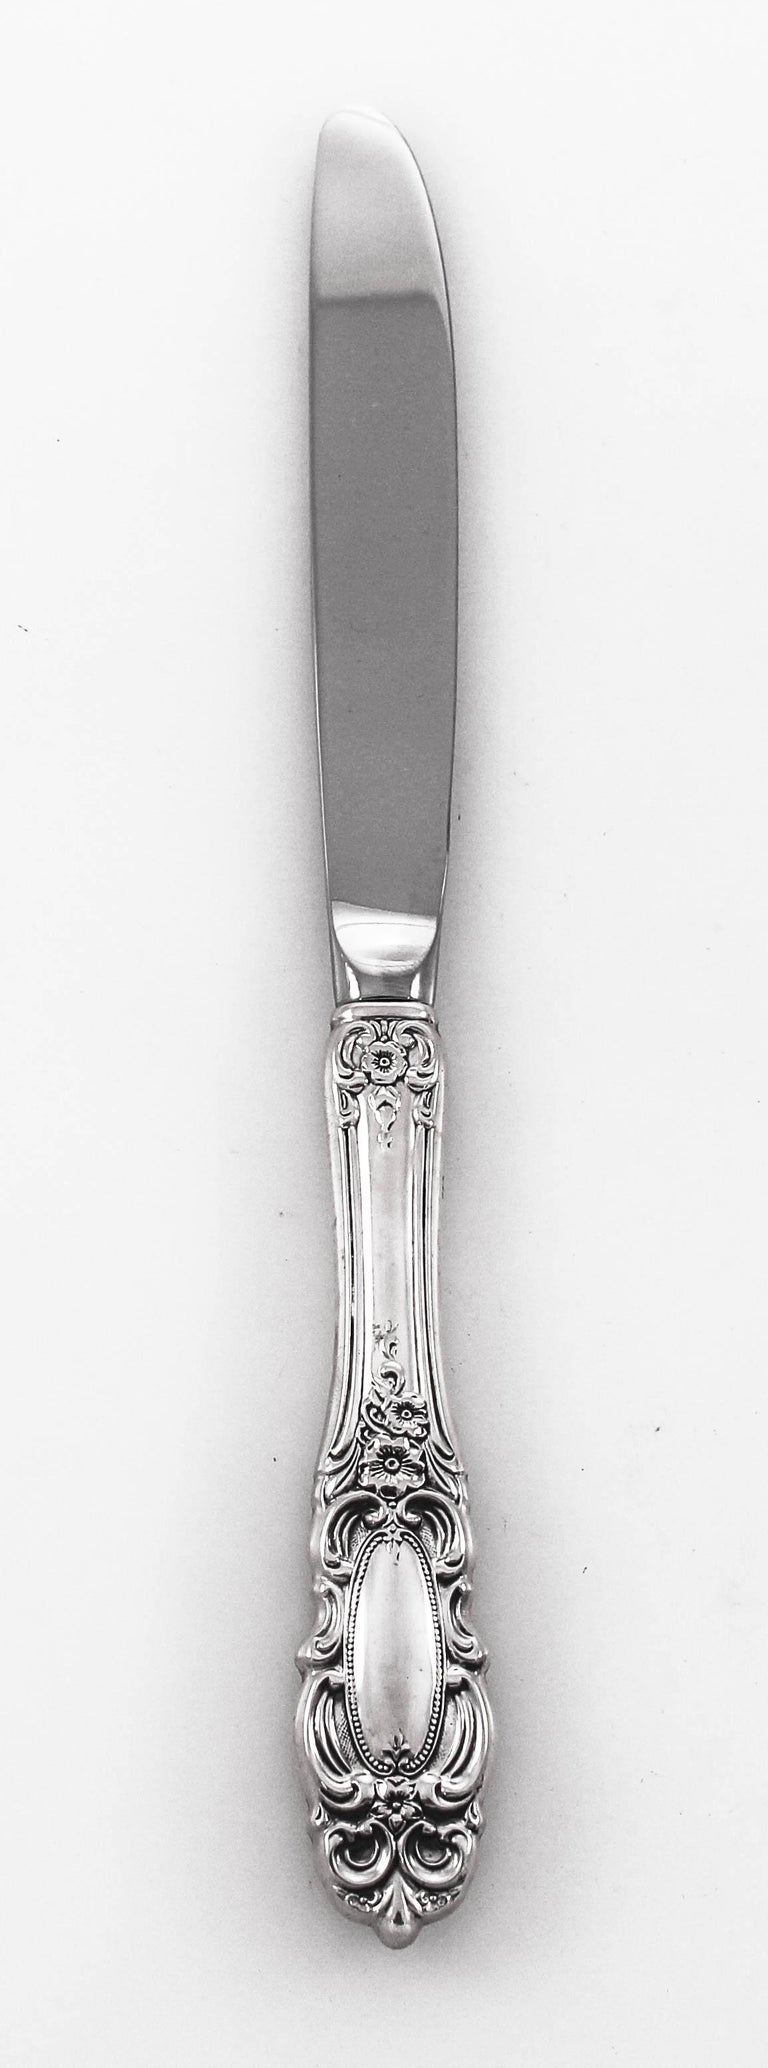 This sterling silver dinner size set of Grand Duchess by Towle Silversmiths is a Classic and will never go out of style. Included are 12 settings, 5 pieces each: dinner fork and knife, oval soup spoon, salad fork and dessert spoon. There are flowers